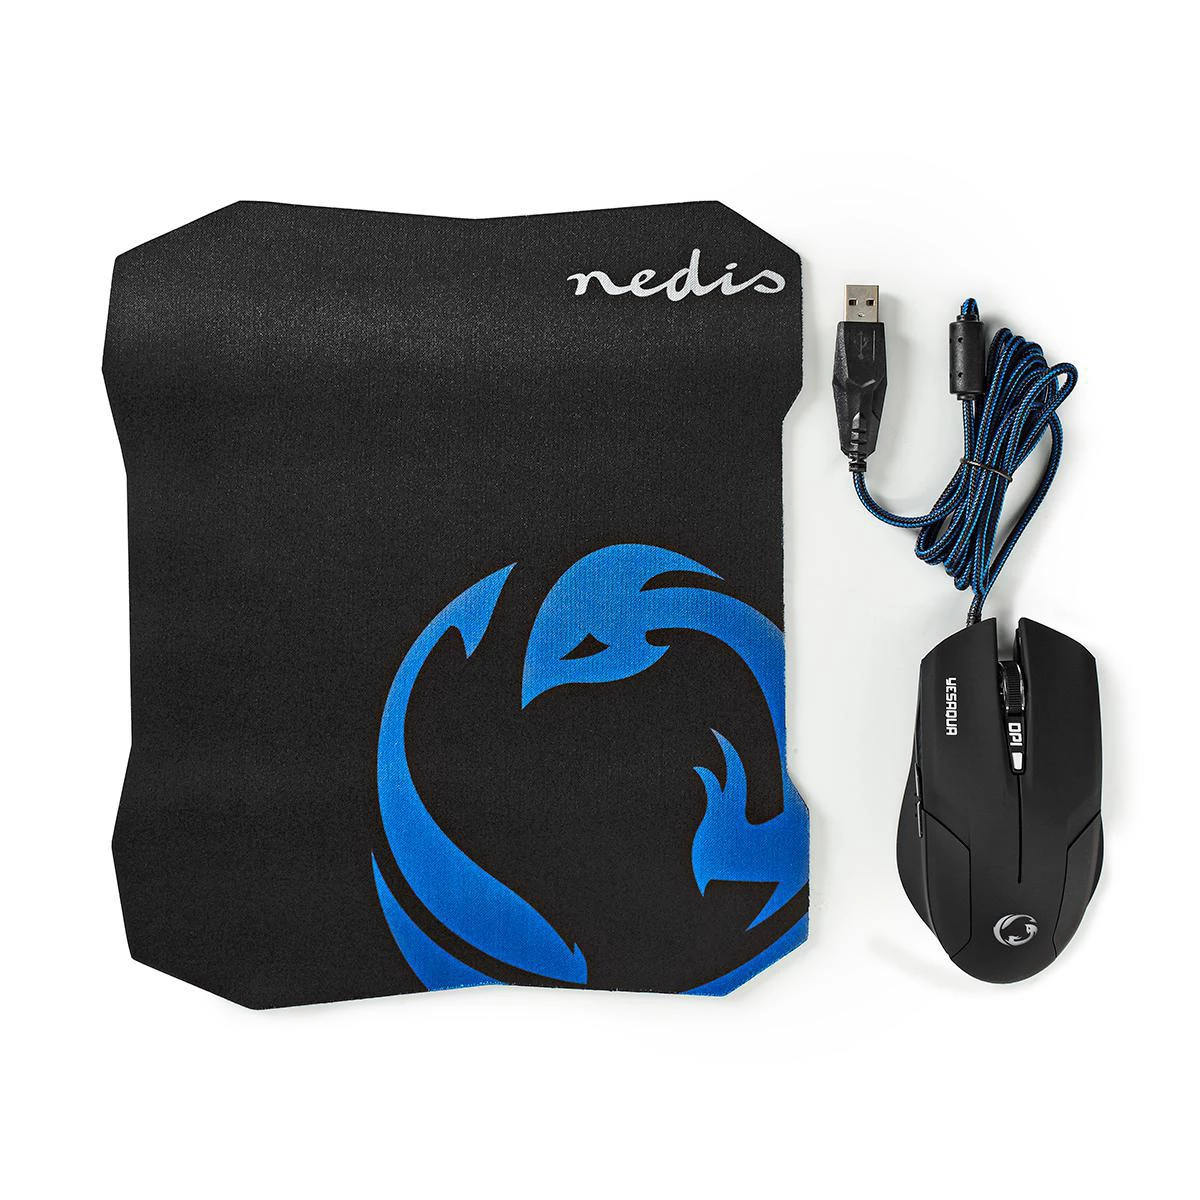 Gaming Mouse & Mouse Pad Set